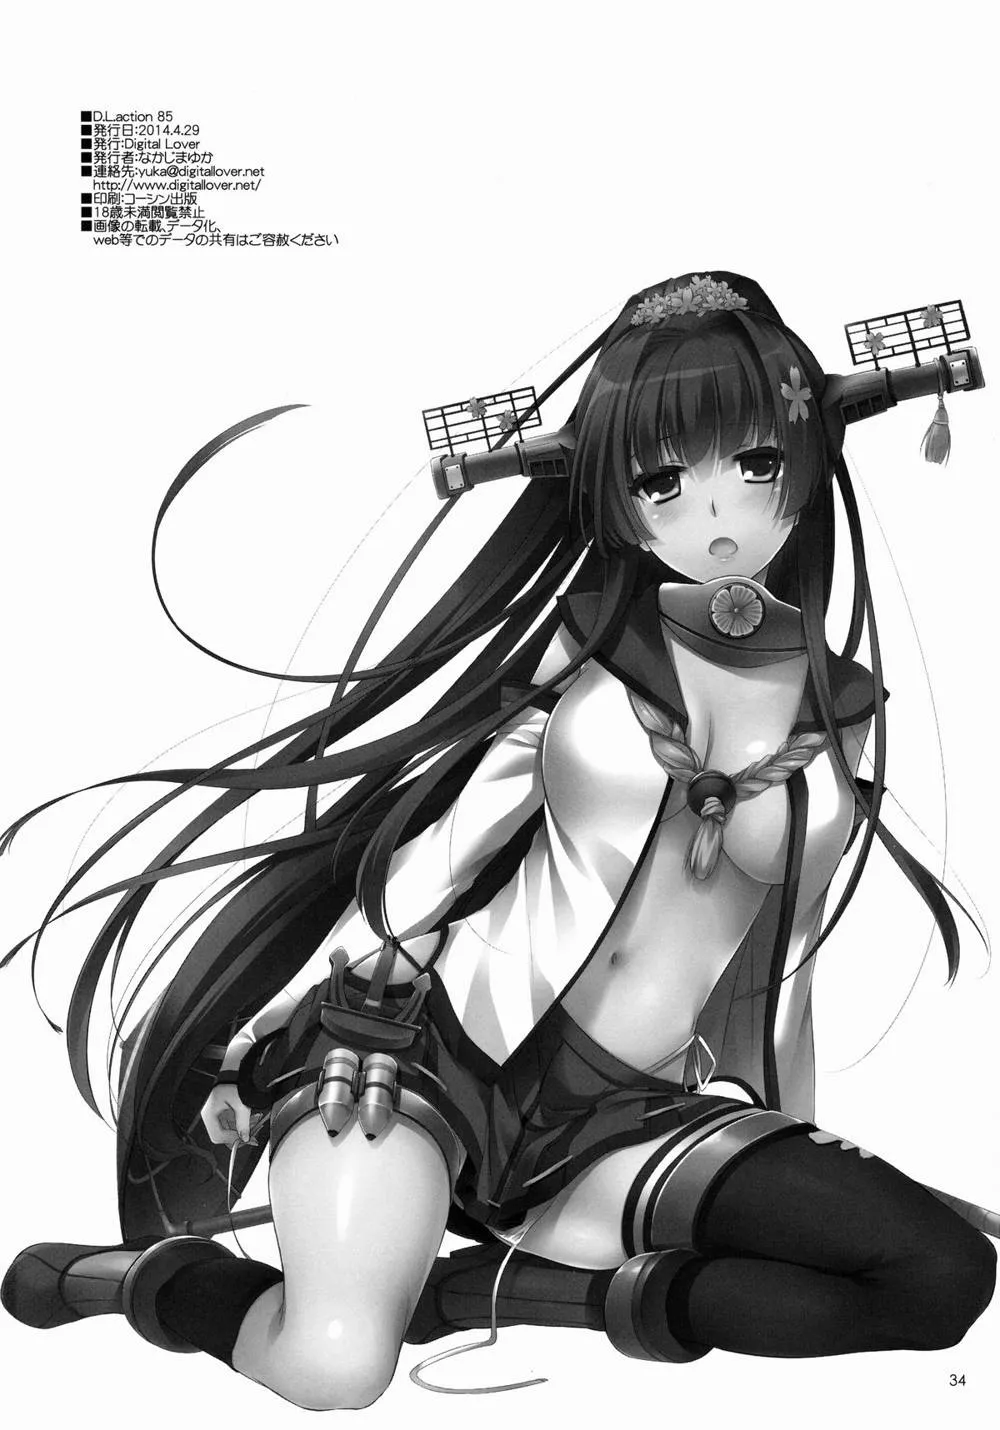 Kantai Collection,D.L. Action 85 [Japanese][第34页]